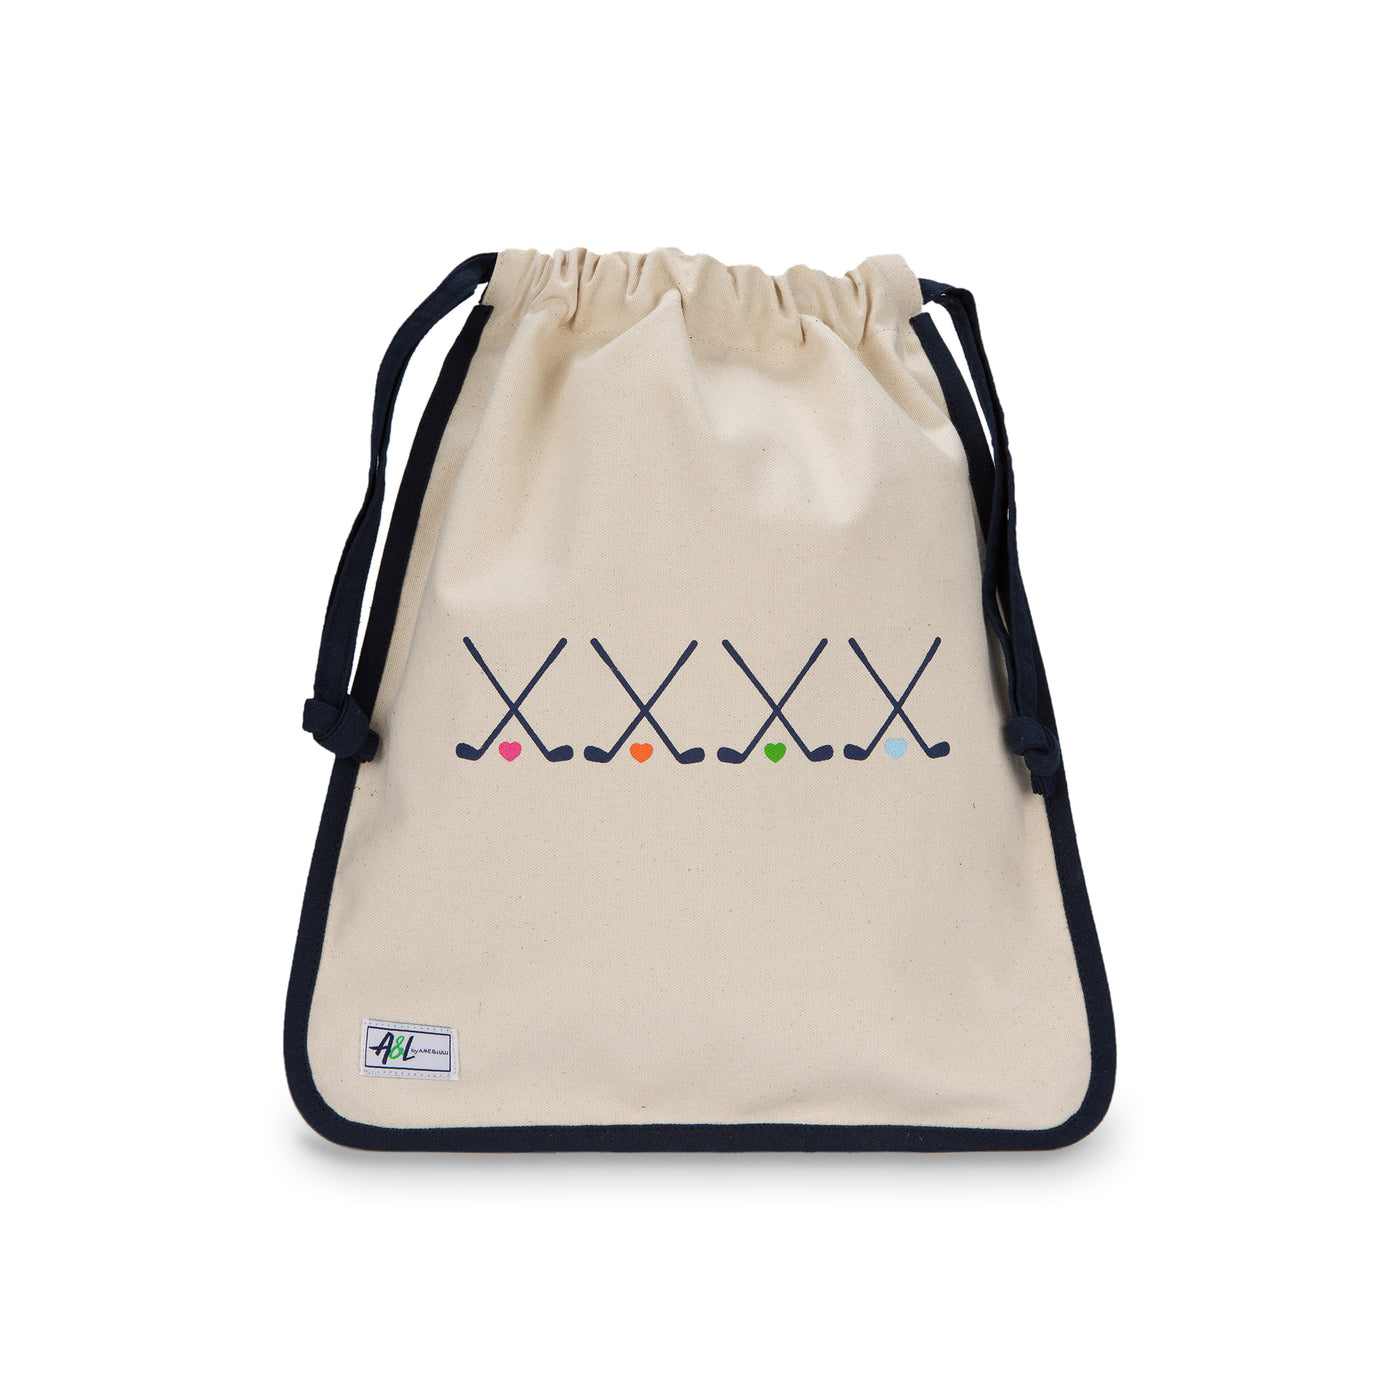 tan canvas drawstring shoe bag with navy crossed golf clubs on front.